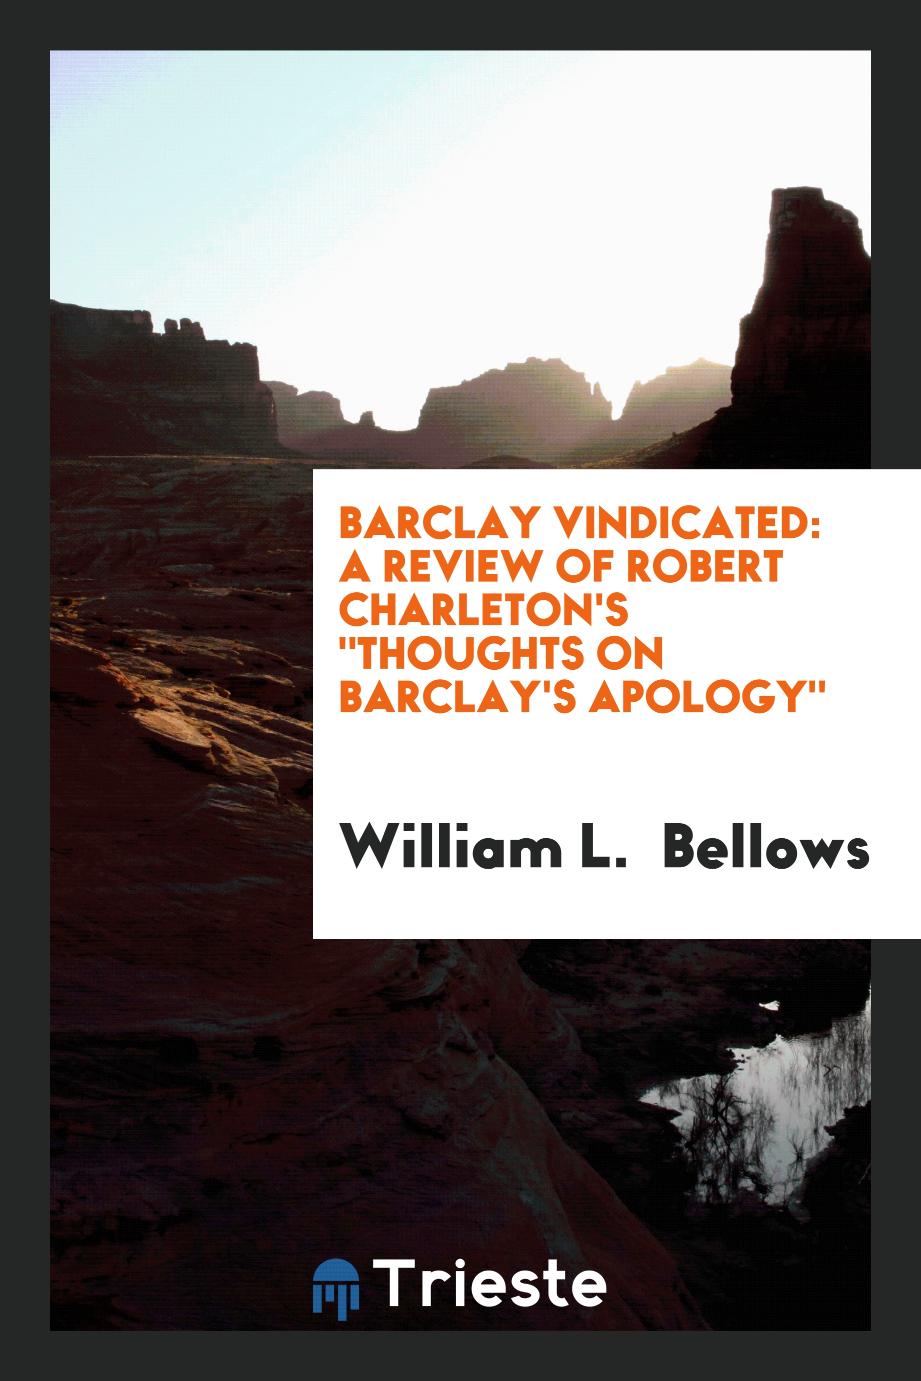 Barclay Vindicated: A Review of Robert Charleton's "Thoughts on Barclay's Apology"